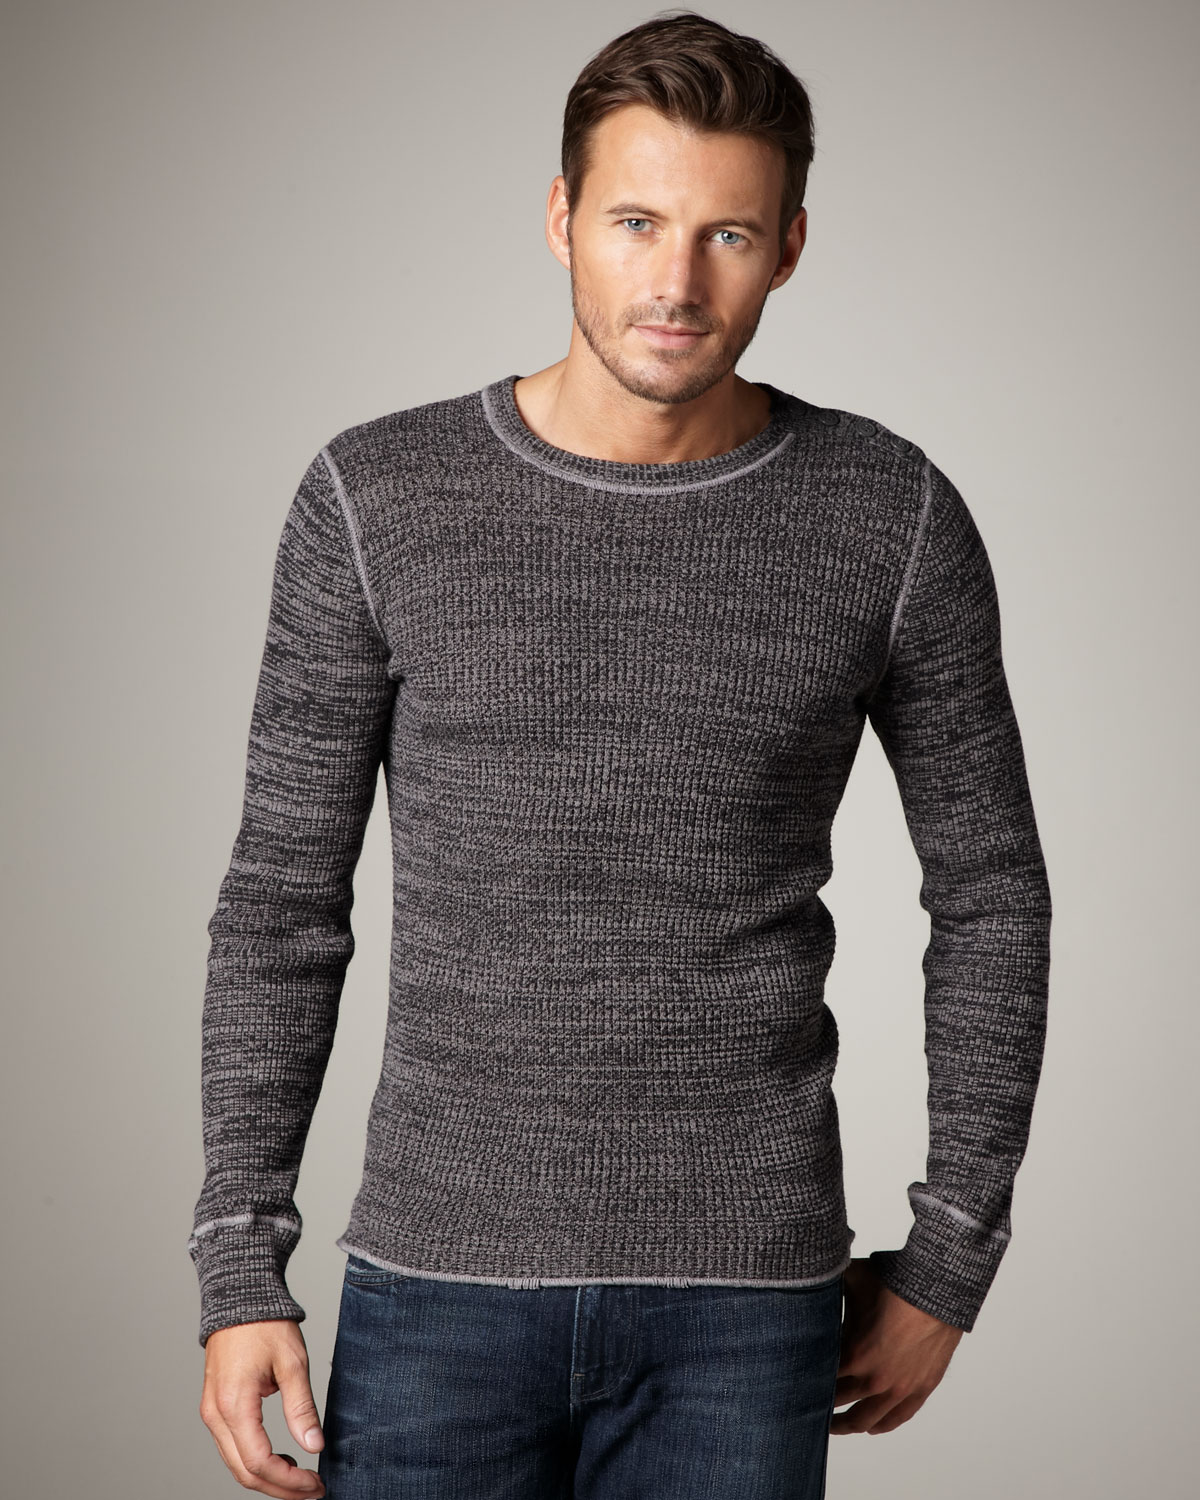 Lyst - 7 For All Mankind Space-dye Sweater in Gray for Men